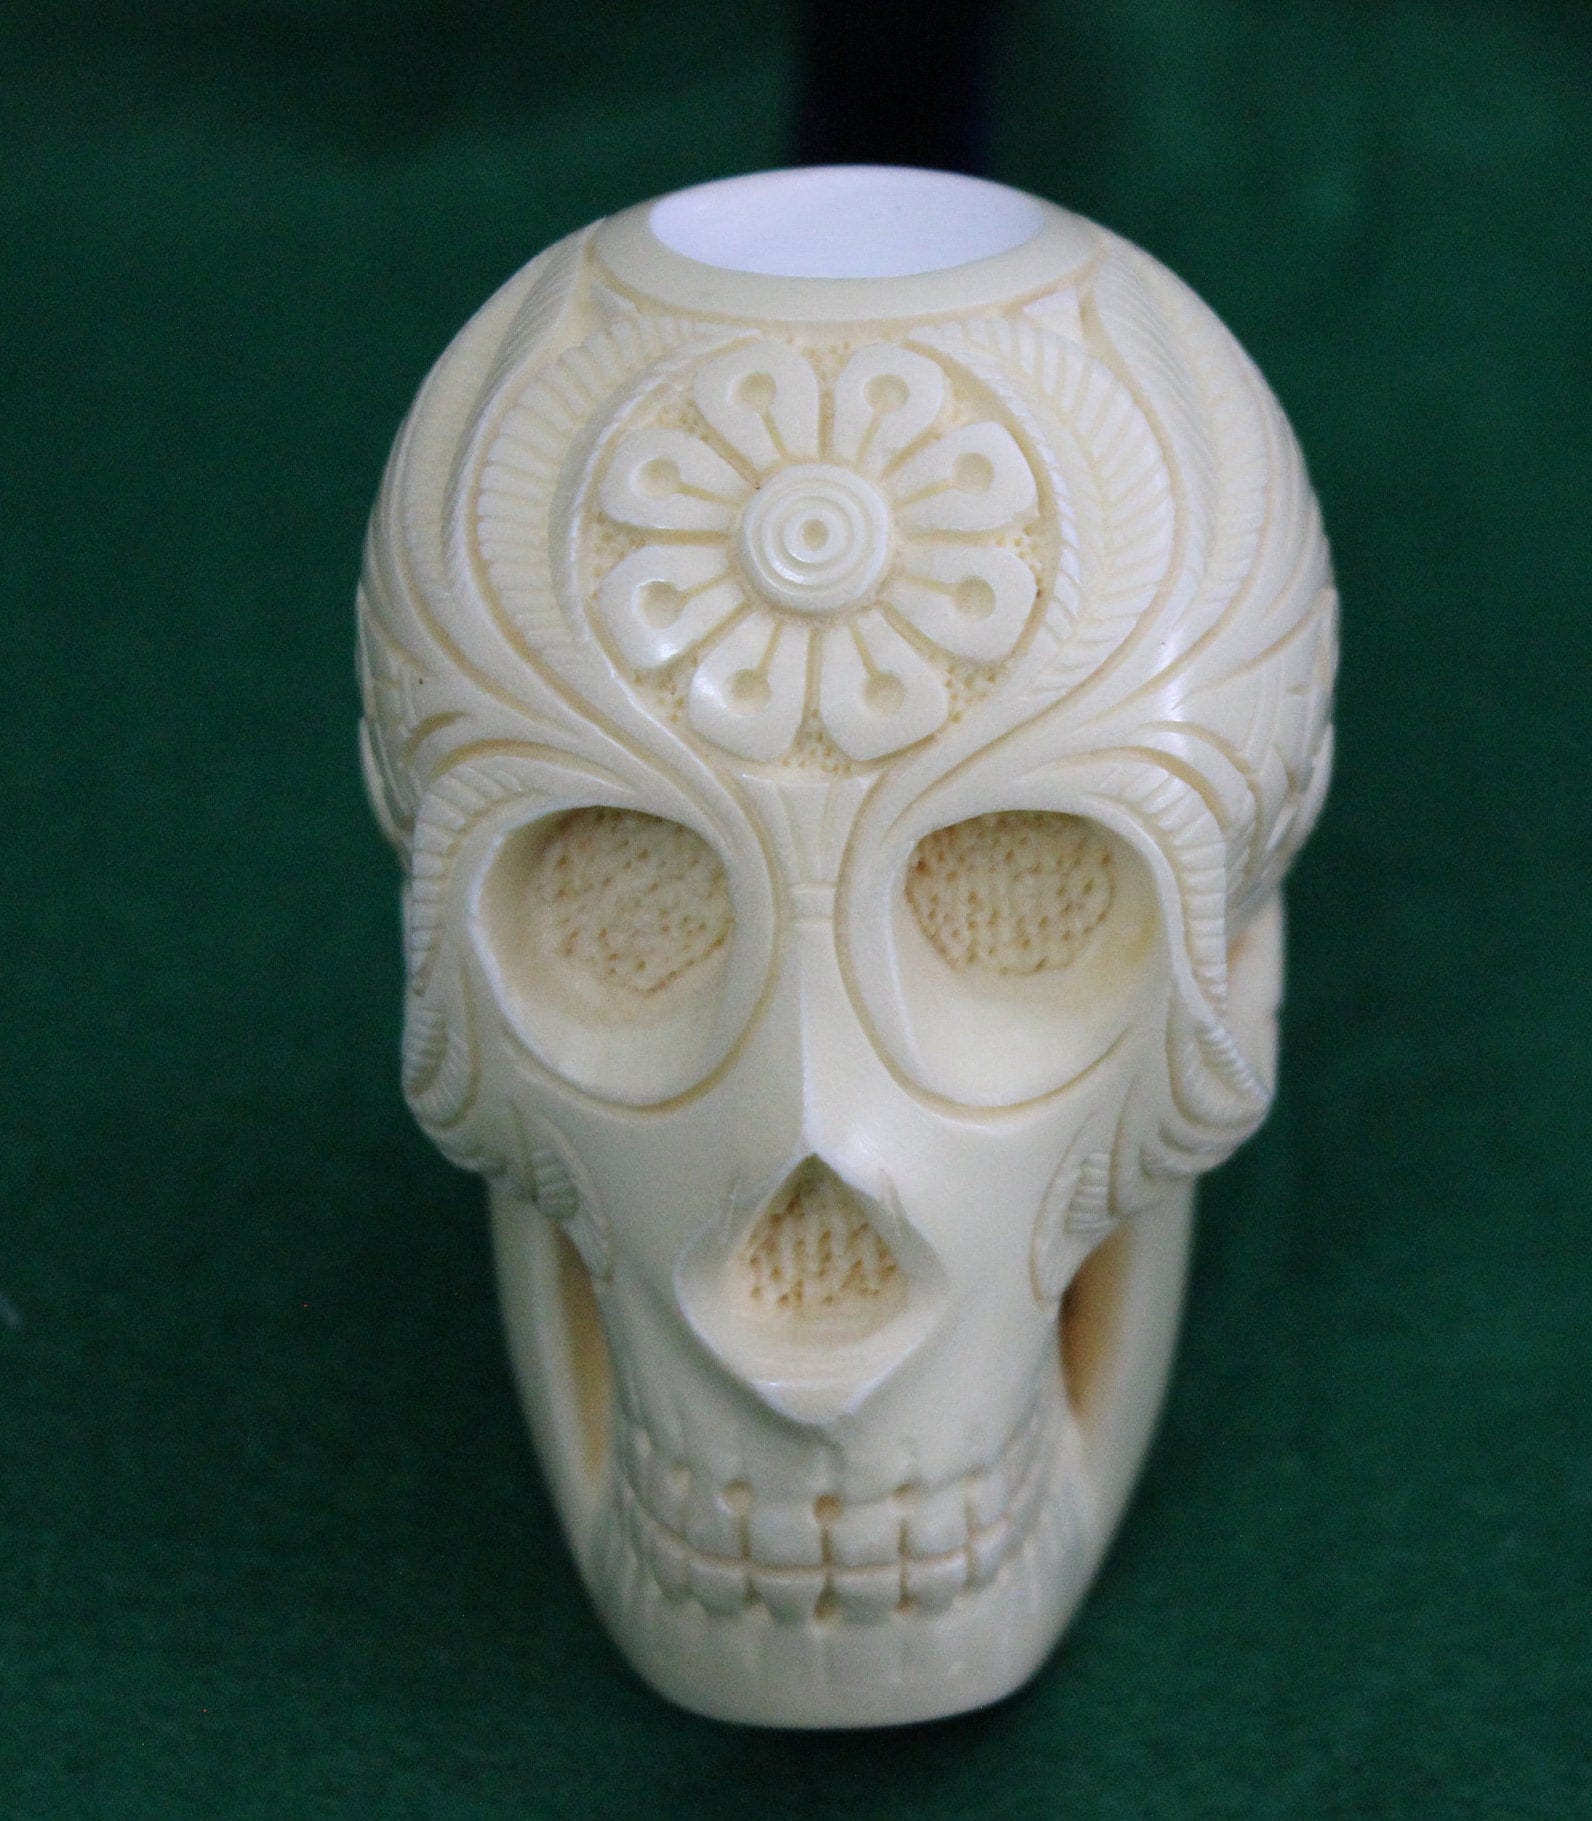 Meerschaum Tobacco Pipe with Bowl in form of Human Skull